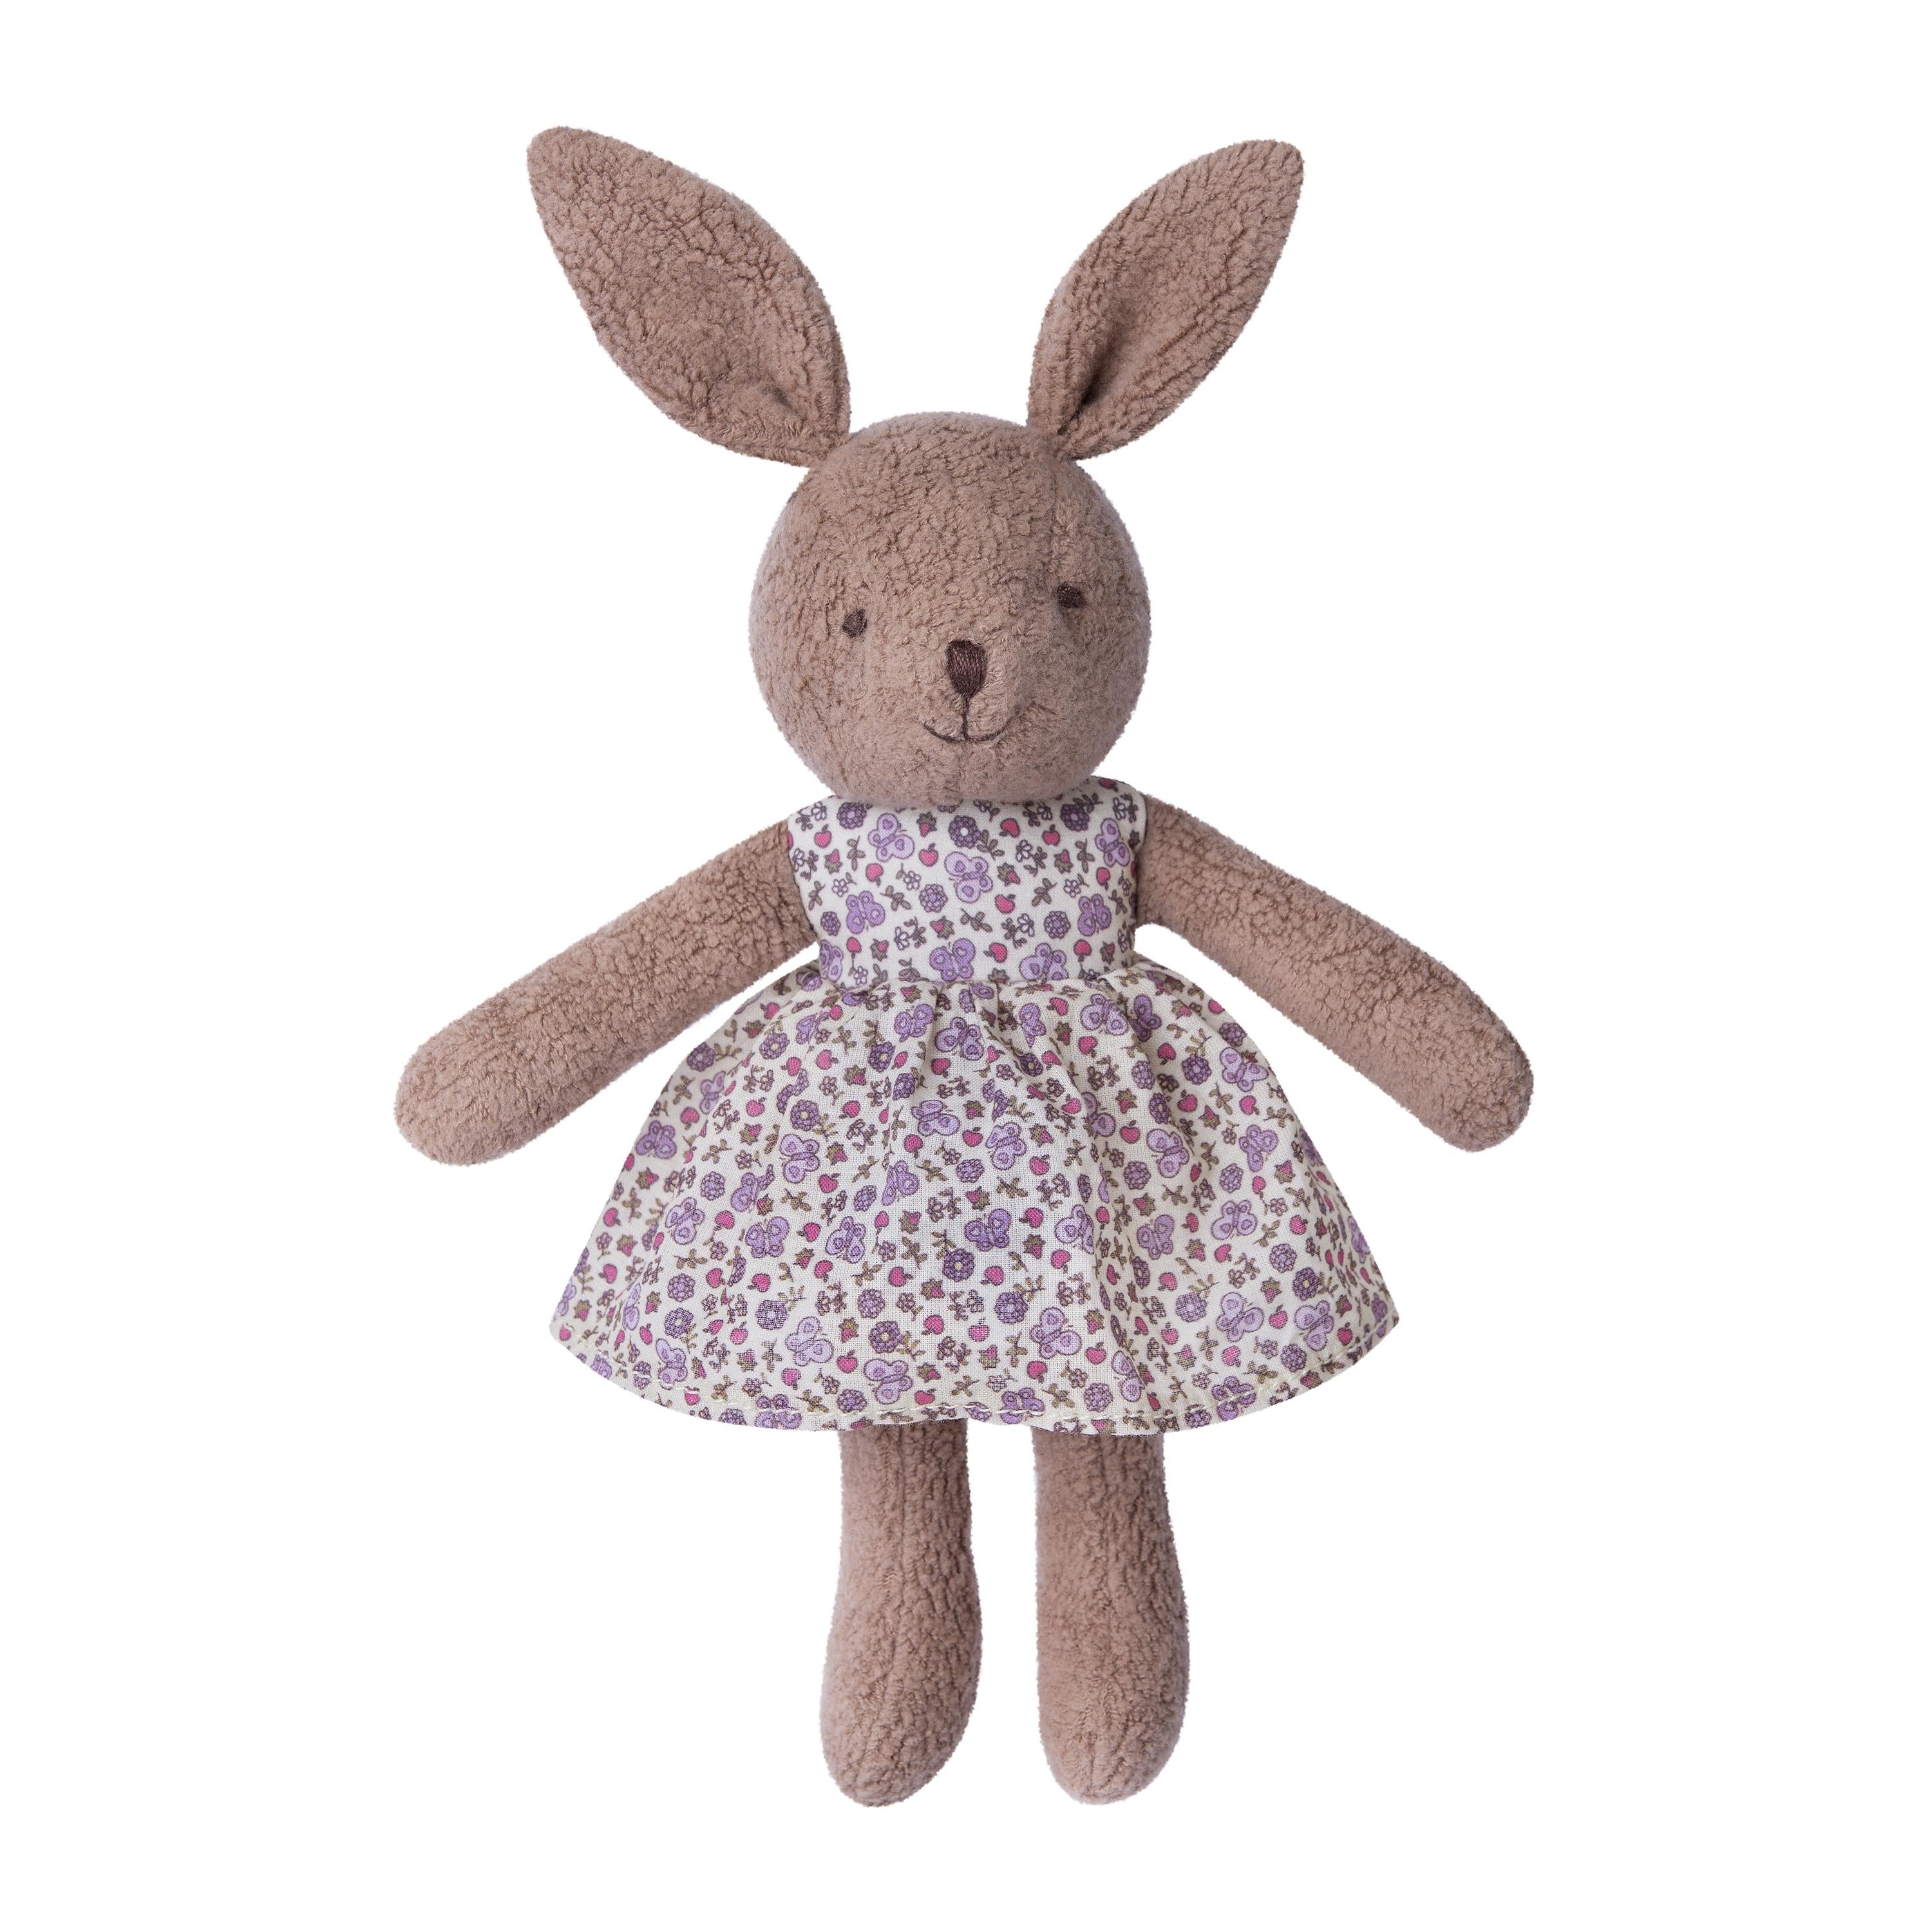 Little Bunny Plush - Cocoa Brown Vintage Floral